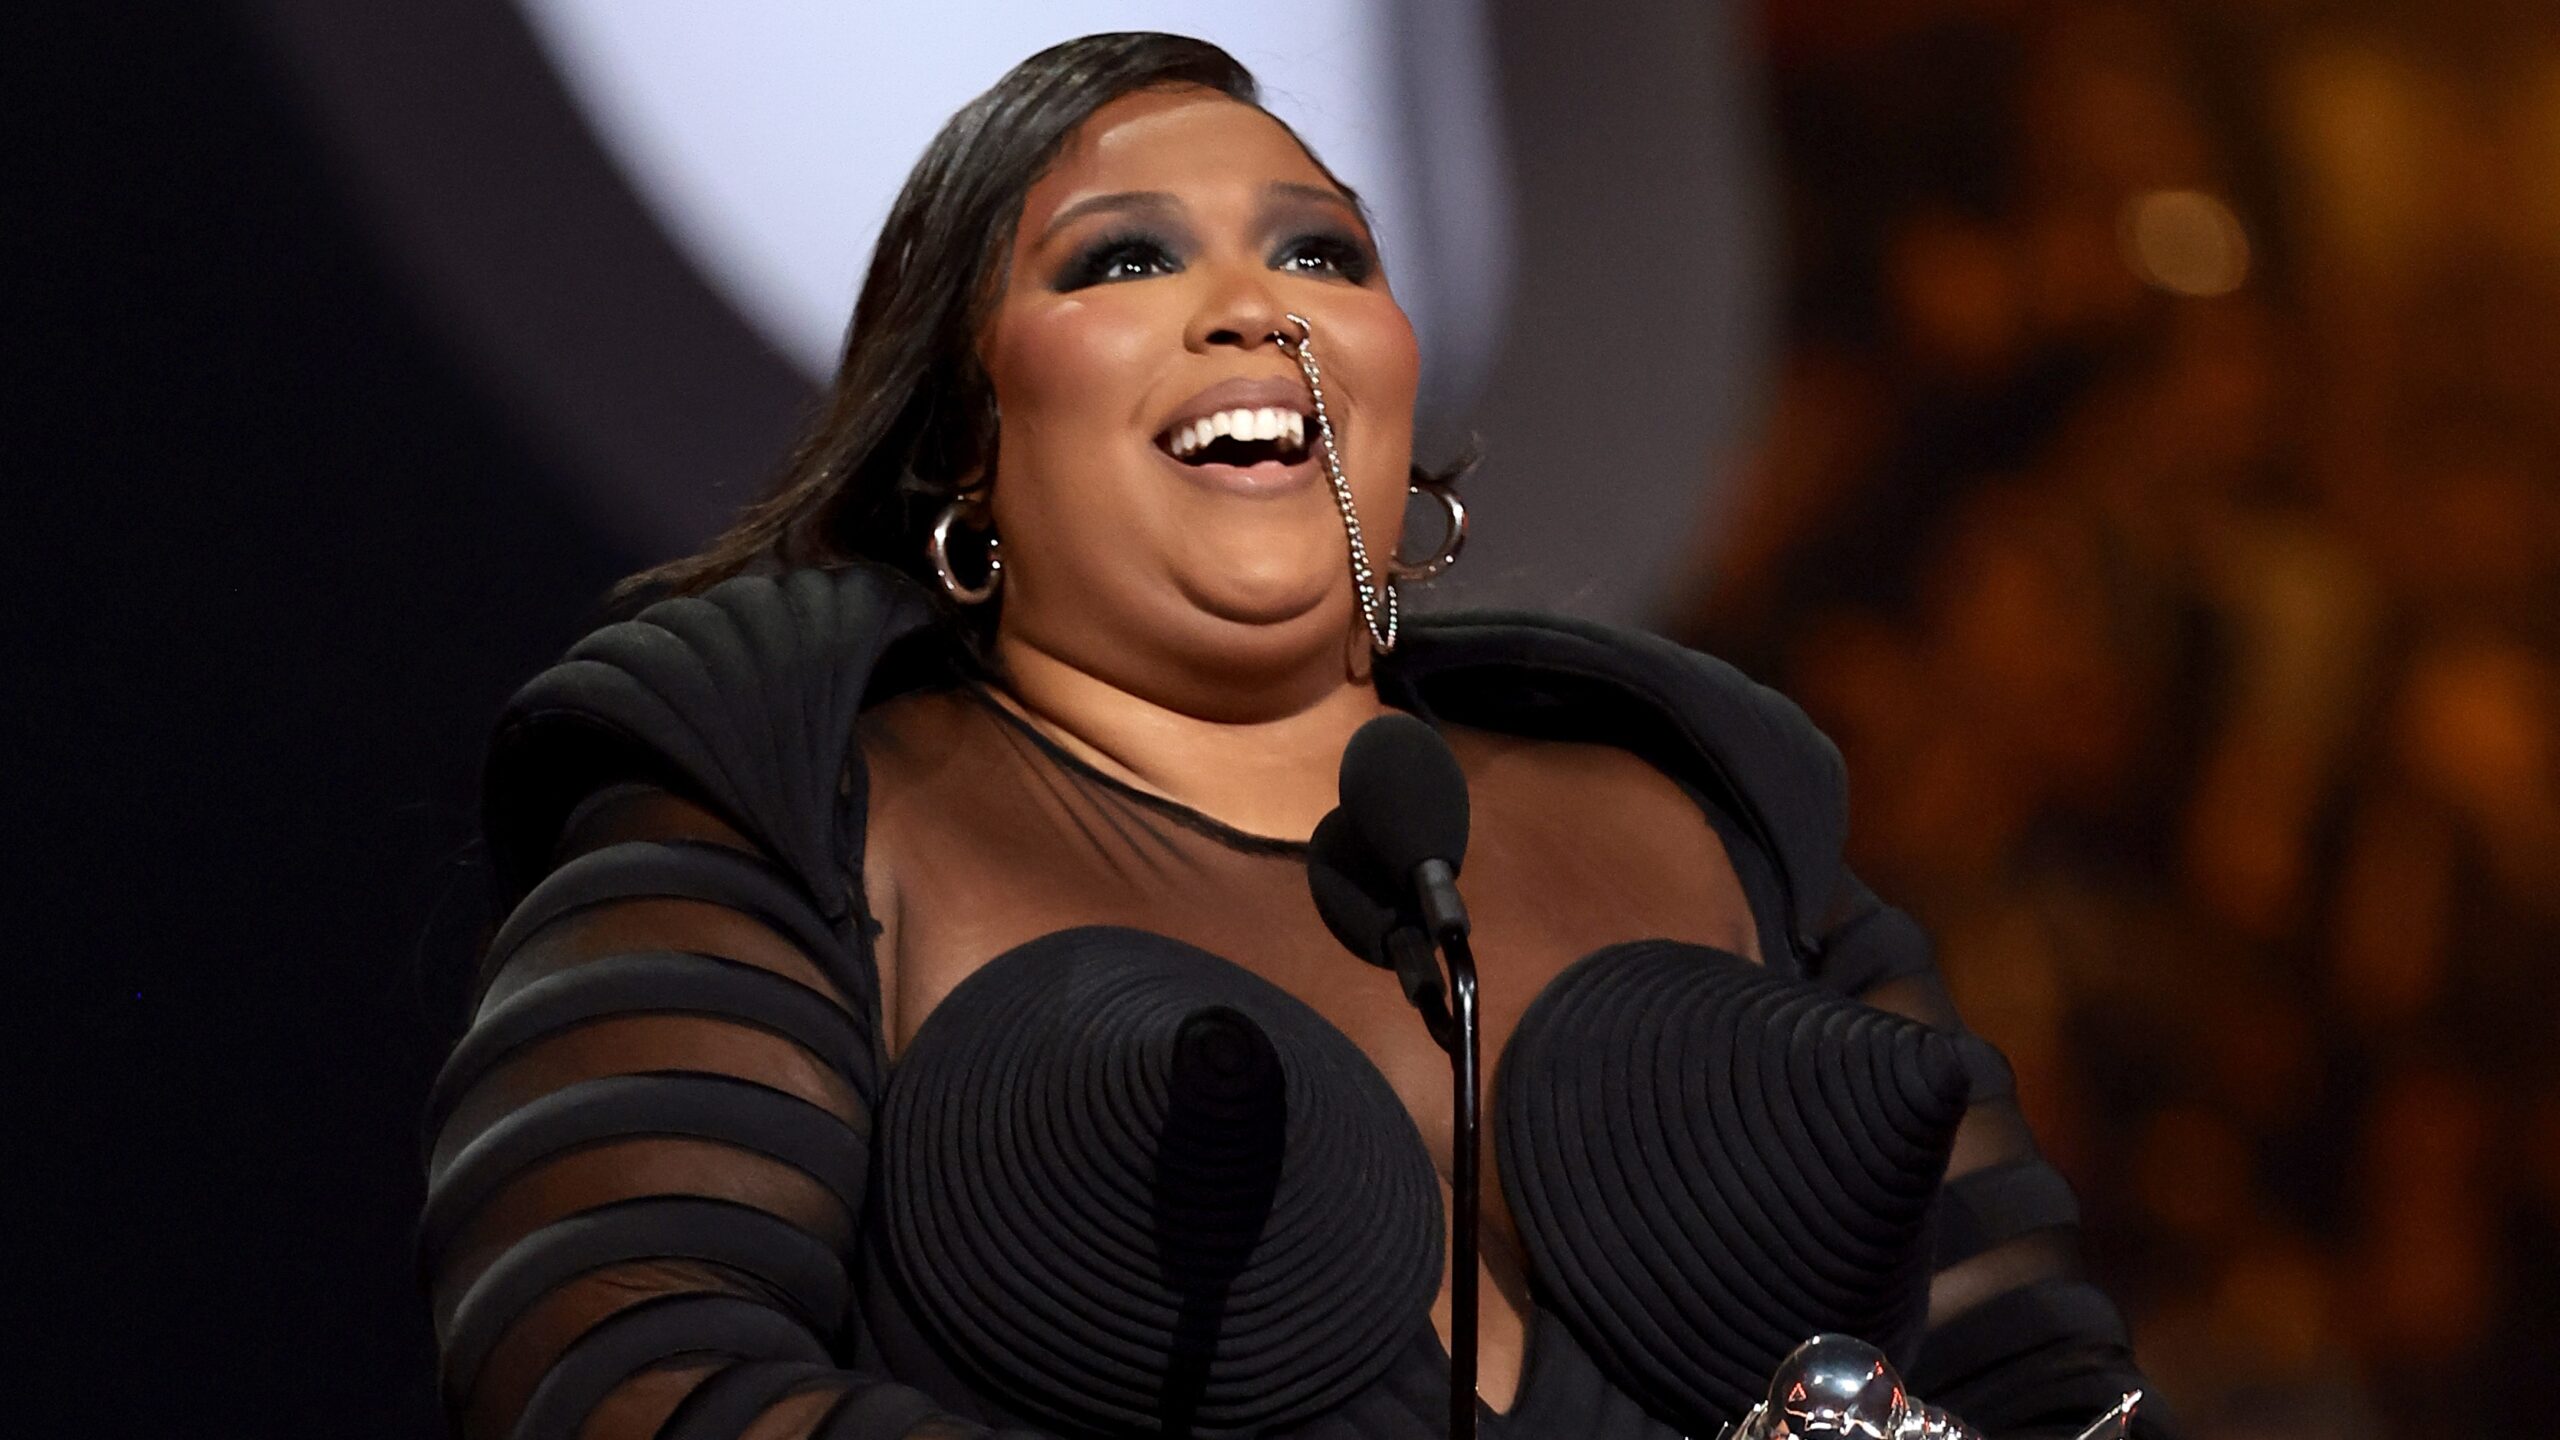 Lizzo Claps Back At Body-Shaming Haters In VMAs Acceptance Speech